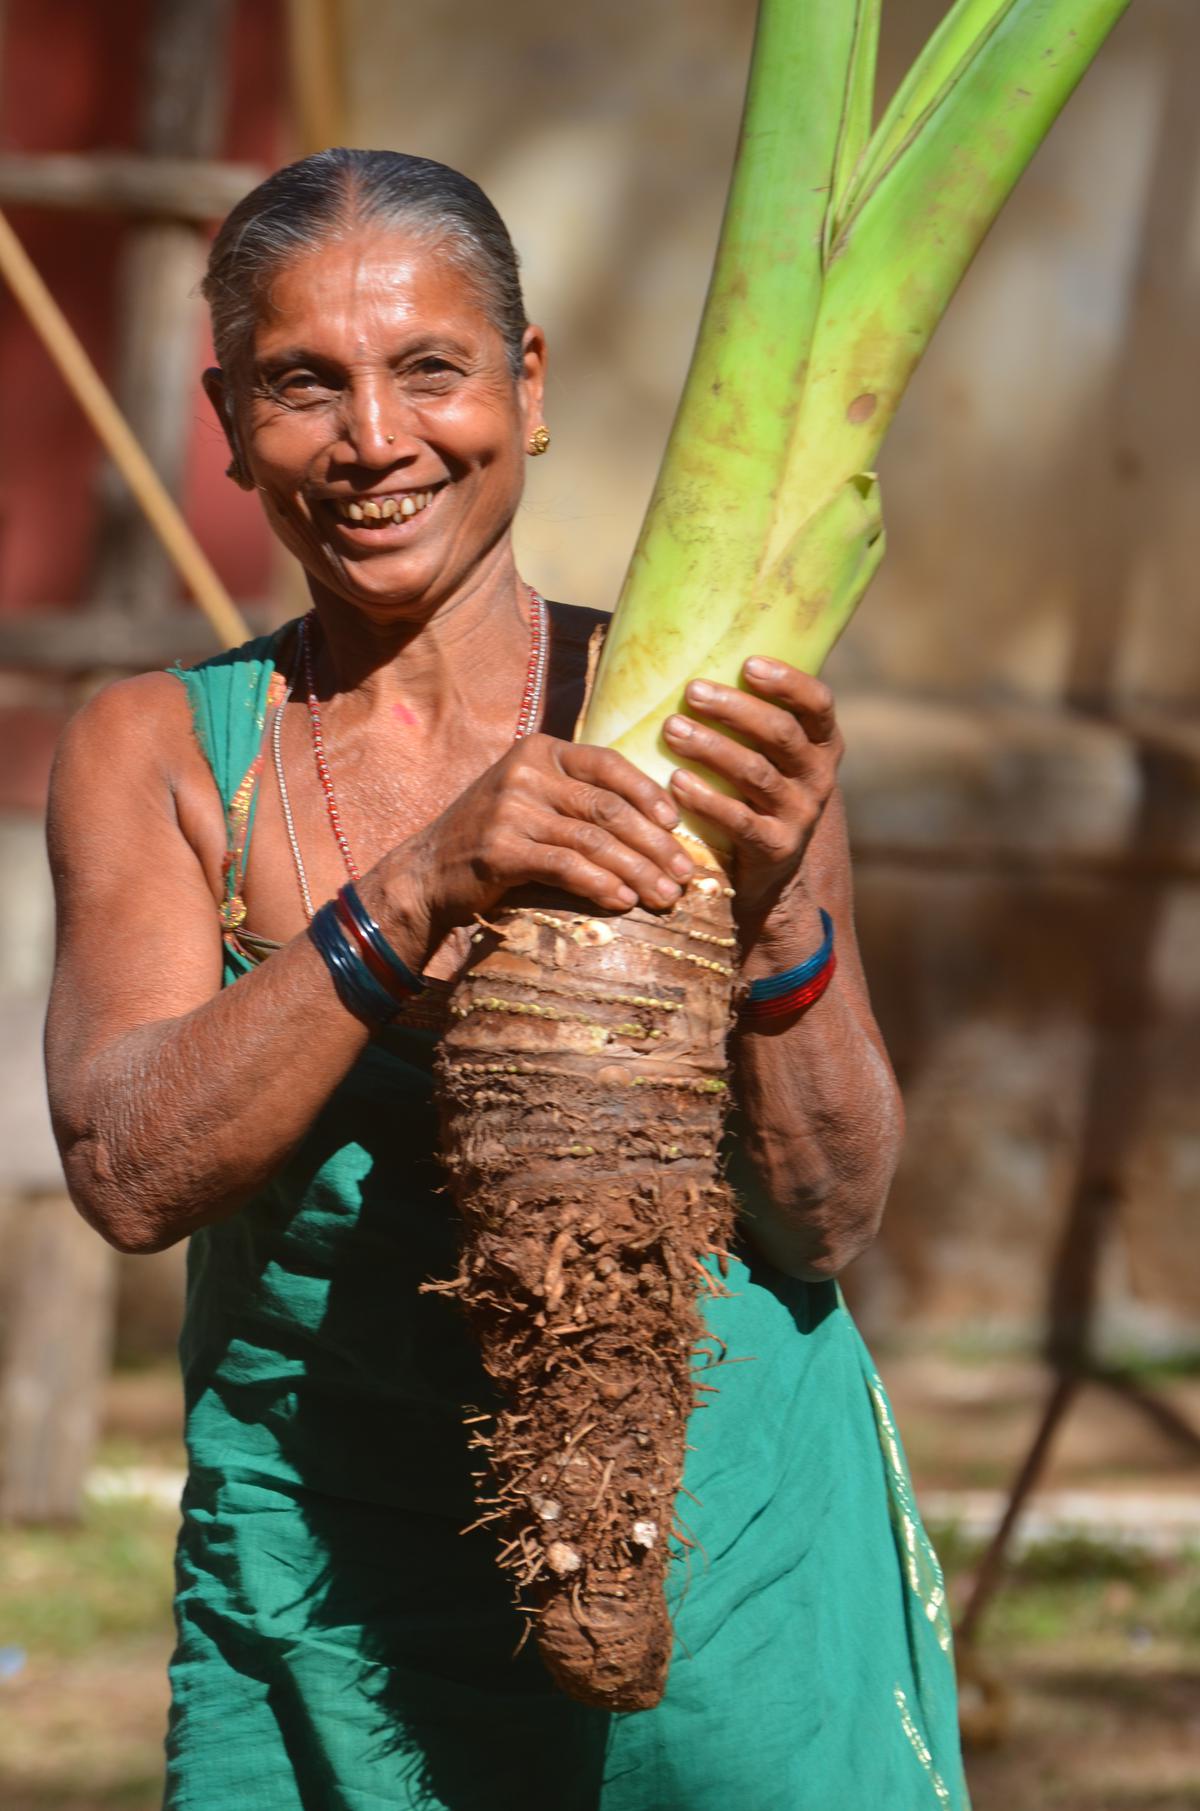 Roots and Tubers festival organised by ASHA in chennai on april 9 and 10, 2022